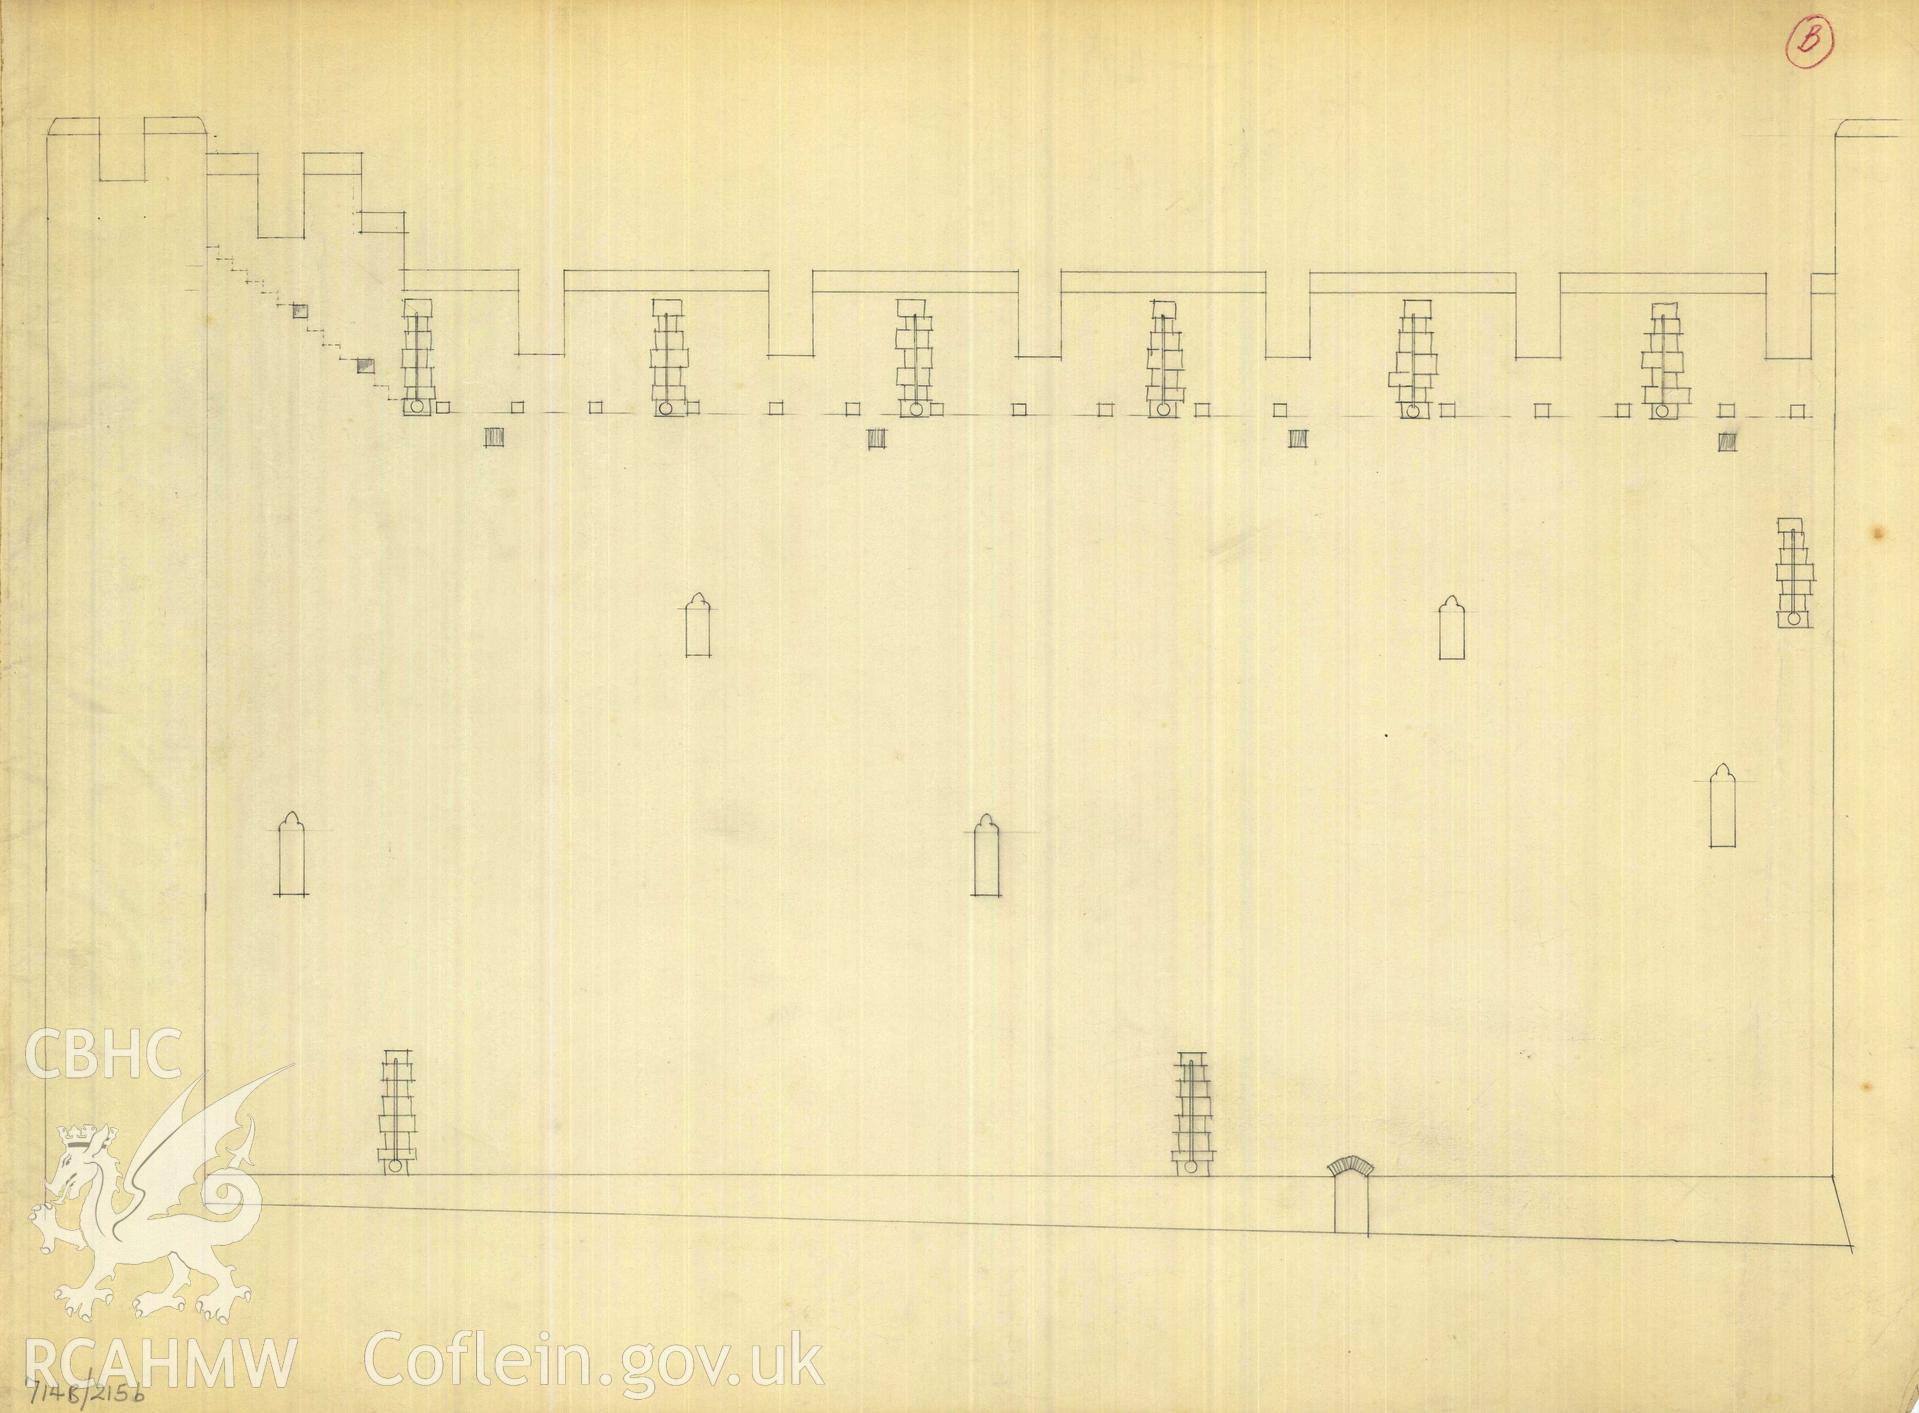 Cadw guardianship monument drawing of Caerphilly Castle. SW tower, elevation unrolled. Cadw Ref. No:714B/215b. Scale 1:48.